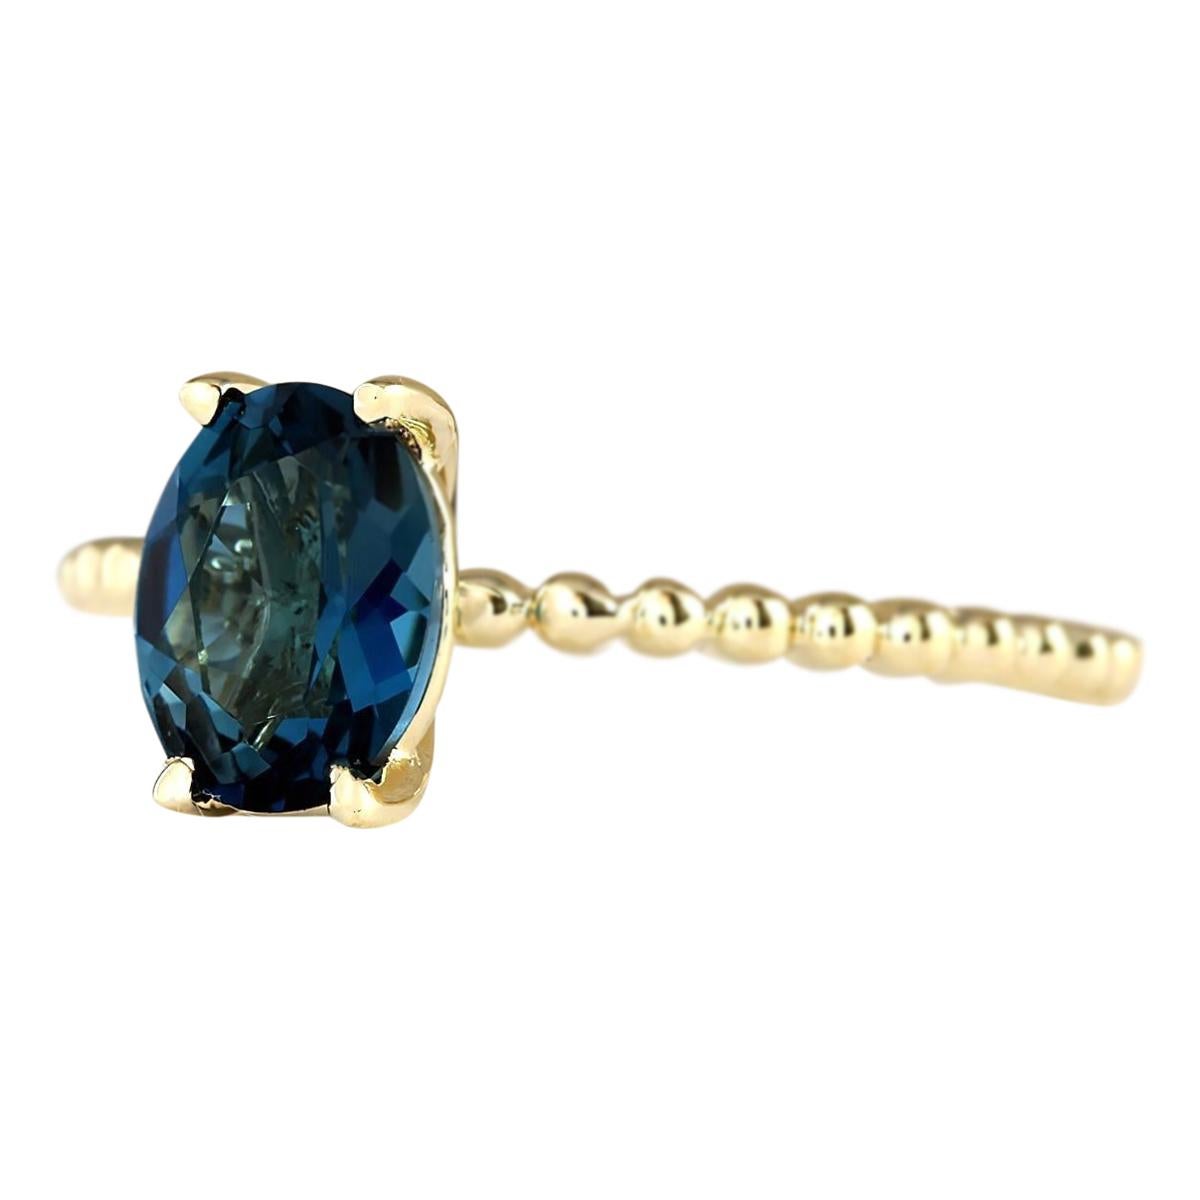 Stamped: 14K Yellow Gold
Total Ring Weight: 8.8 Grams
Total Natural Topaz Weight is 1.39 Carat
Color: London Blue
Face Measures: 7.00x5.00 mm
Sku: [703248W]